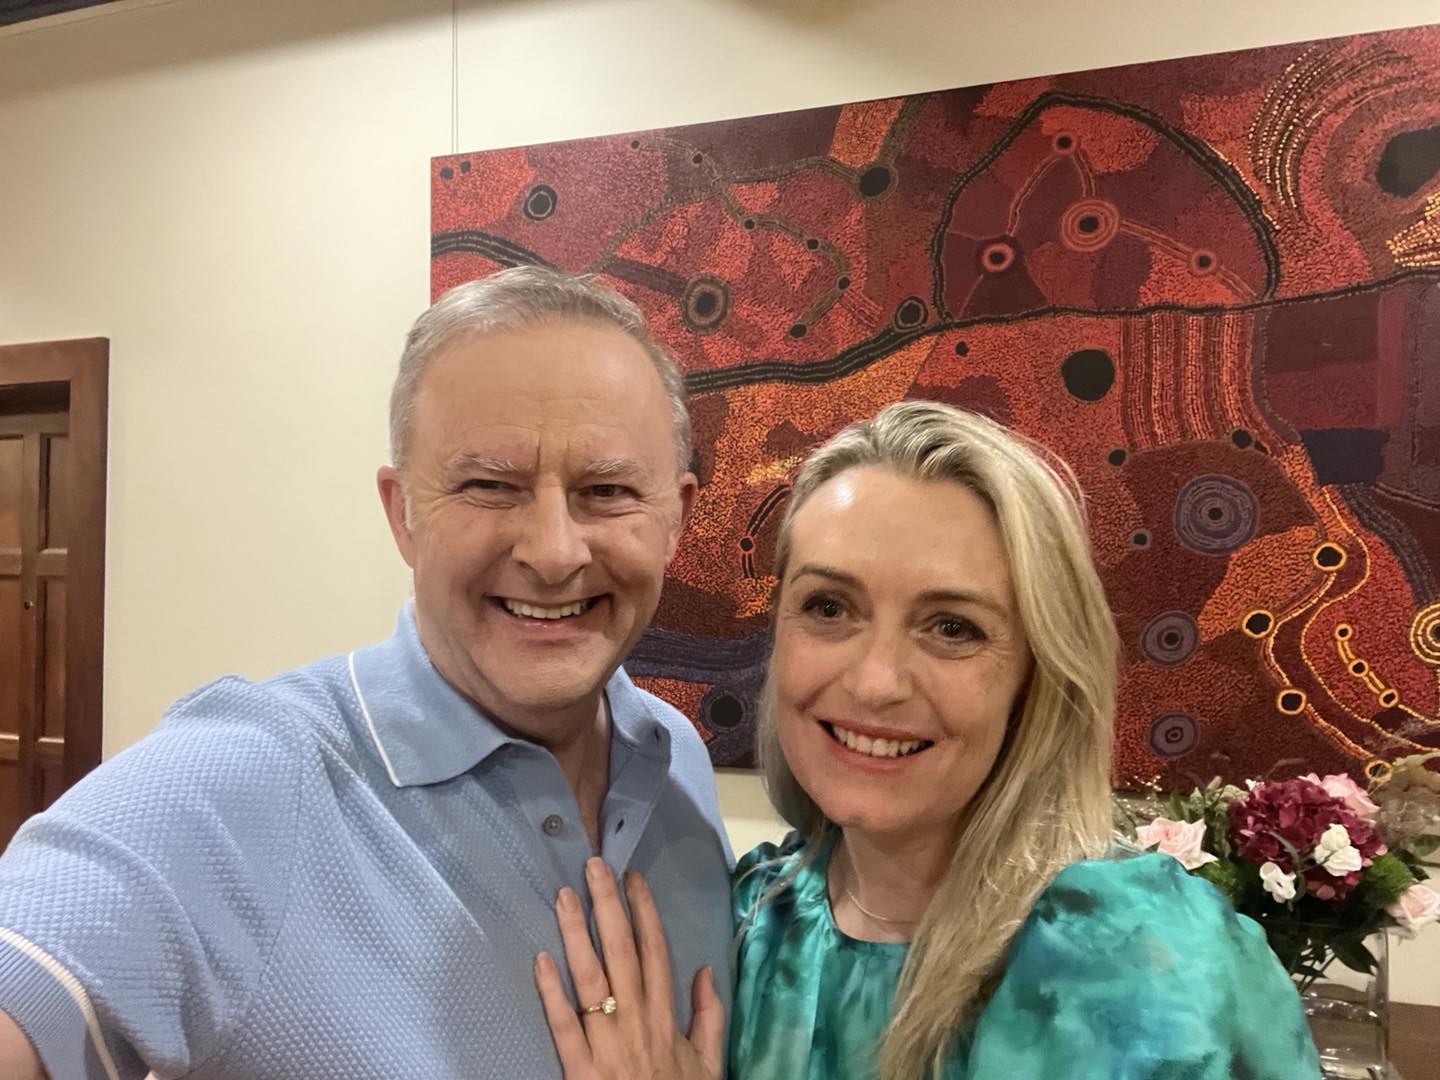 Australia PM Albanese proposes to partner on Valentine's Day and She Said Yes